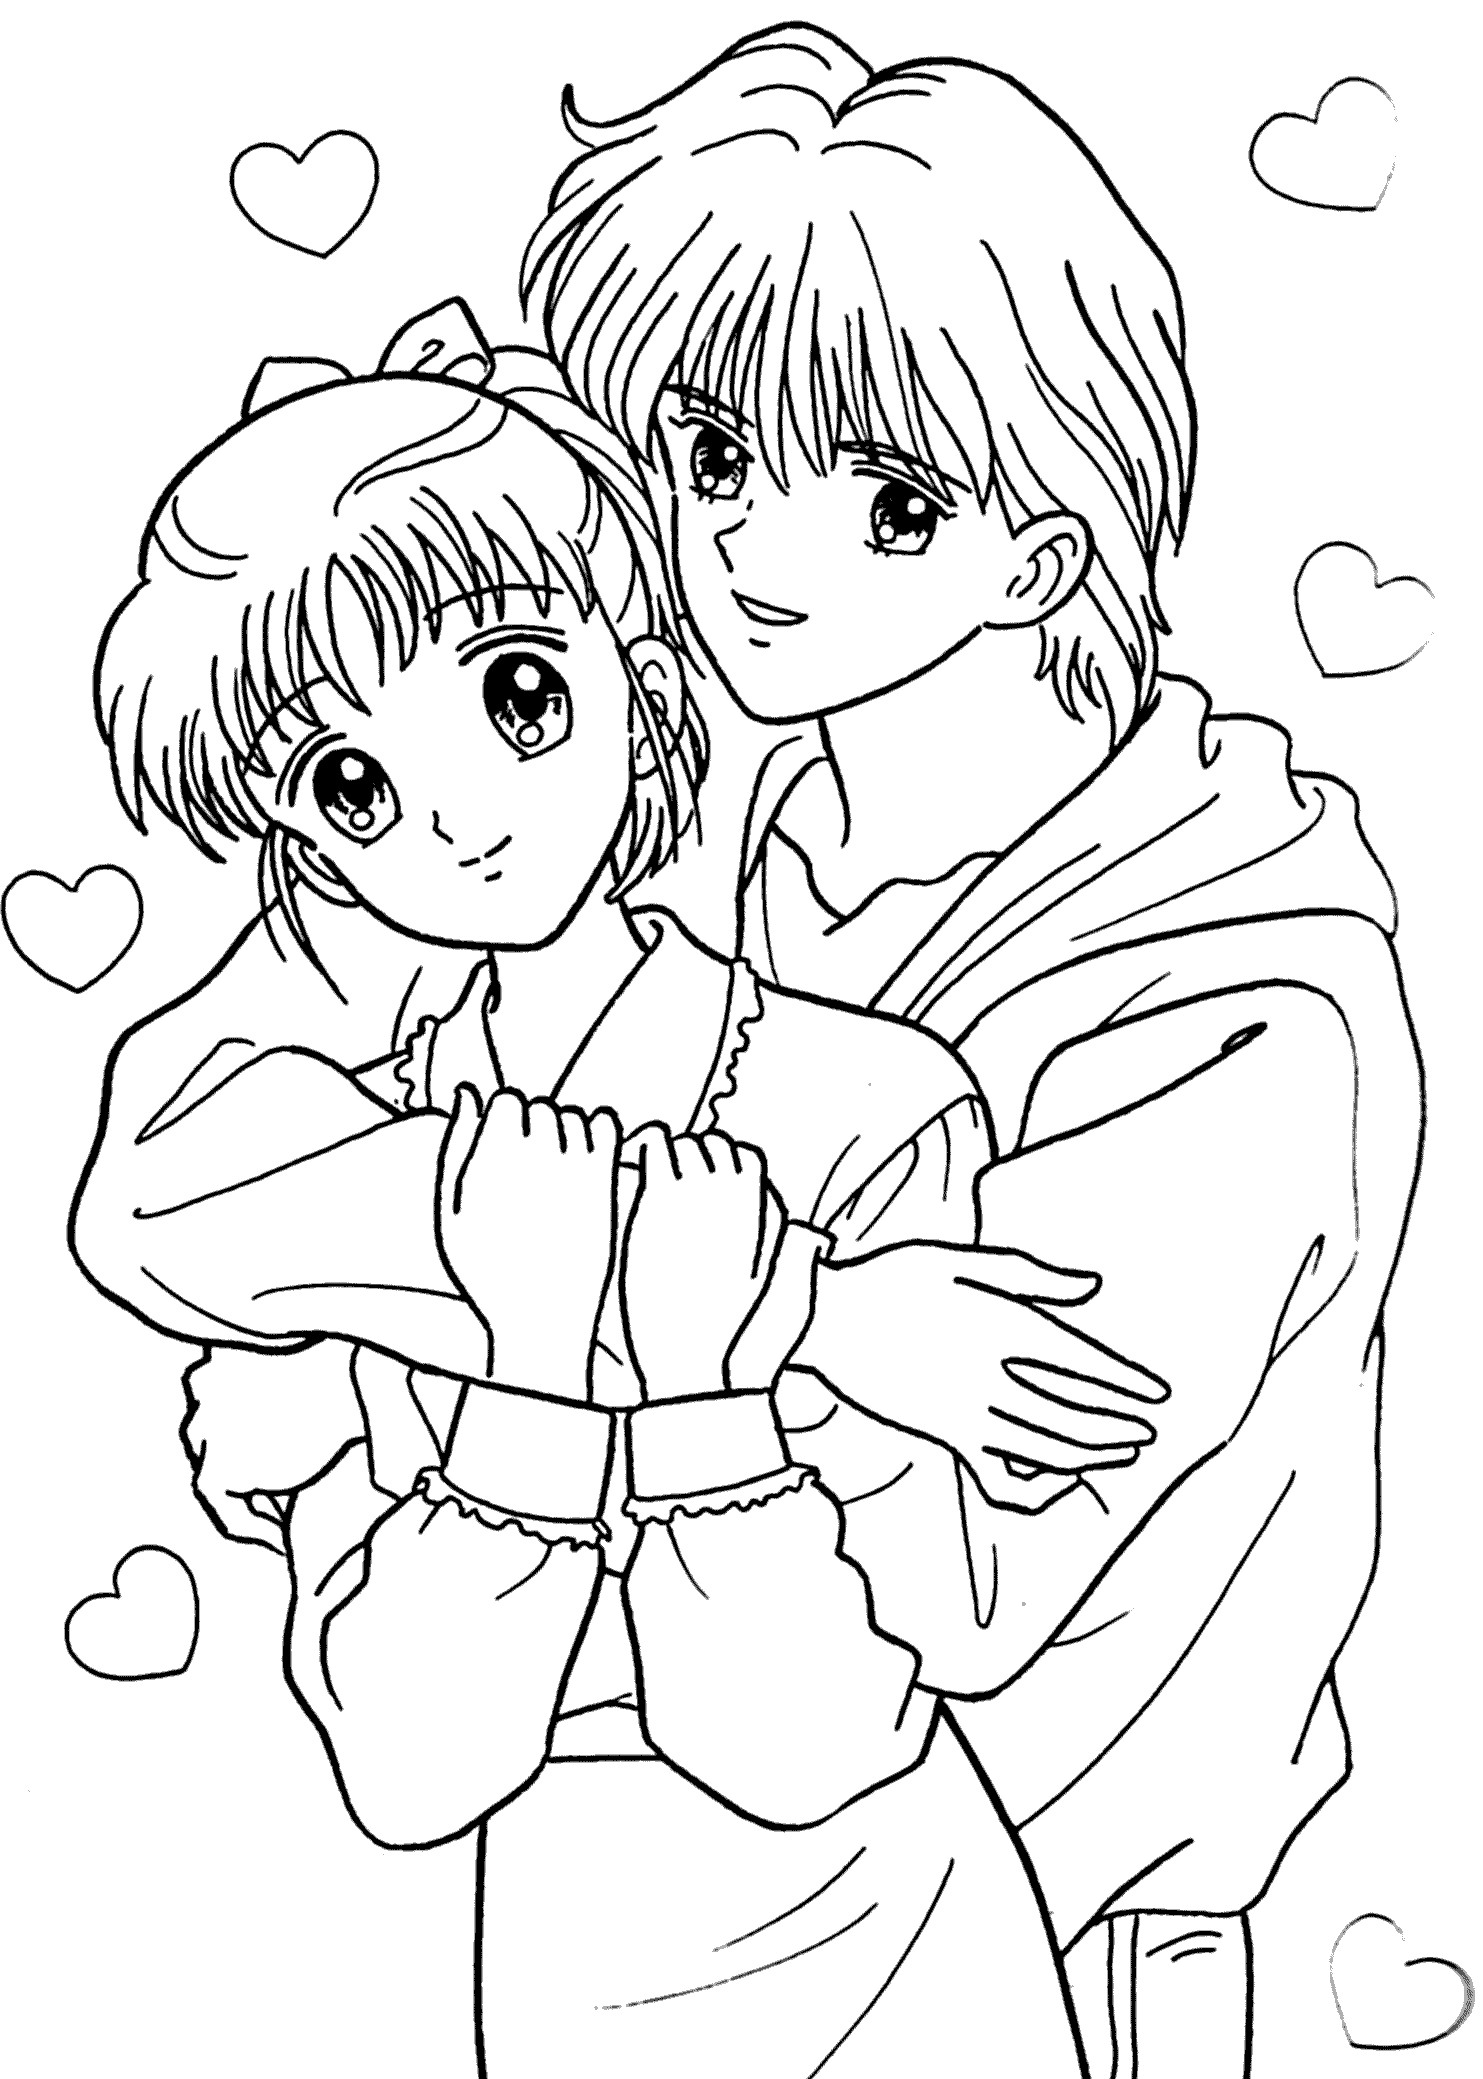 What Boys Love Coloring Sheets
 Girl Cartoon Characters Coloring Pages AZ Coloring Pages